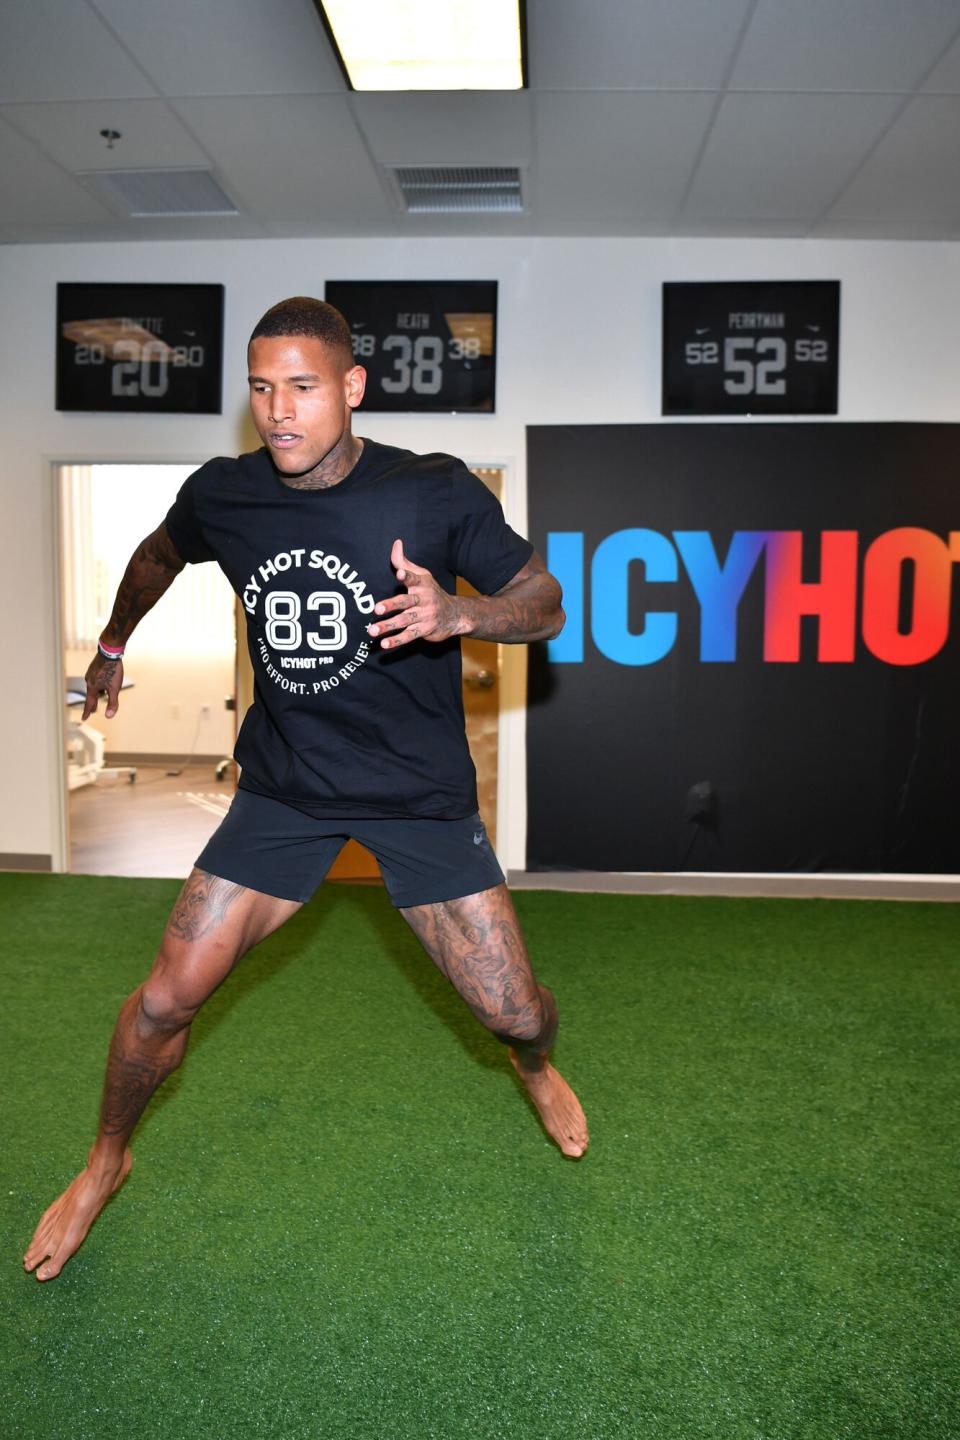 Raiders' Darren Waller hosts a recovery day in Las Vegas, NV with Icy Hot PRO, a new product line that delivers a powerful combination of two maximum-strength pain relievers: menthol and camphor, on October 25, 2022 in Las Vegas, Nevada.